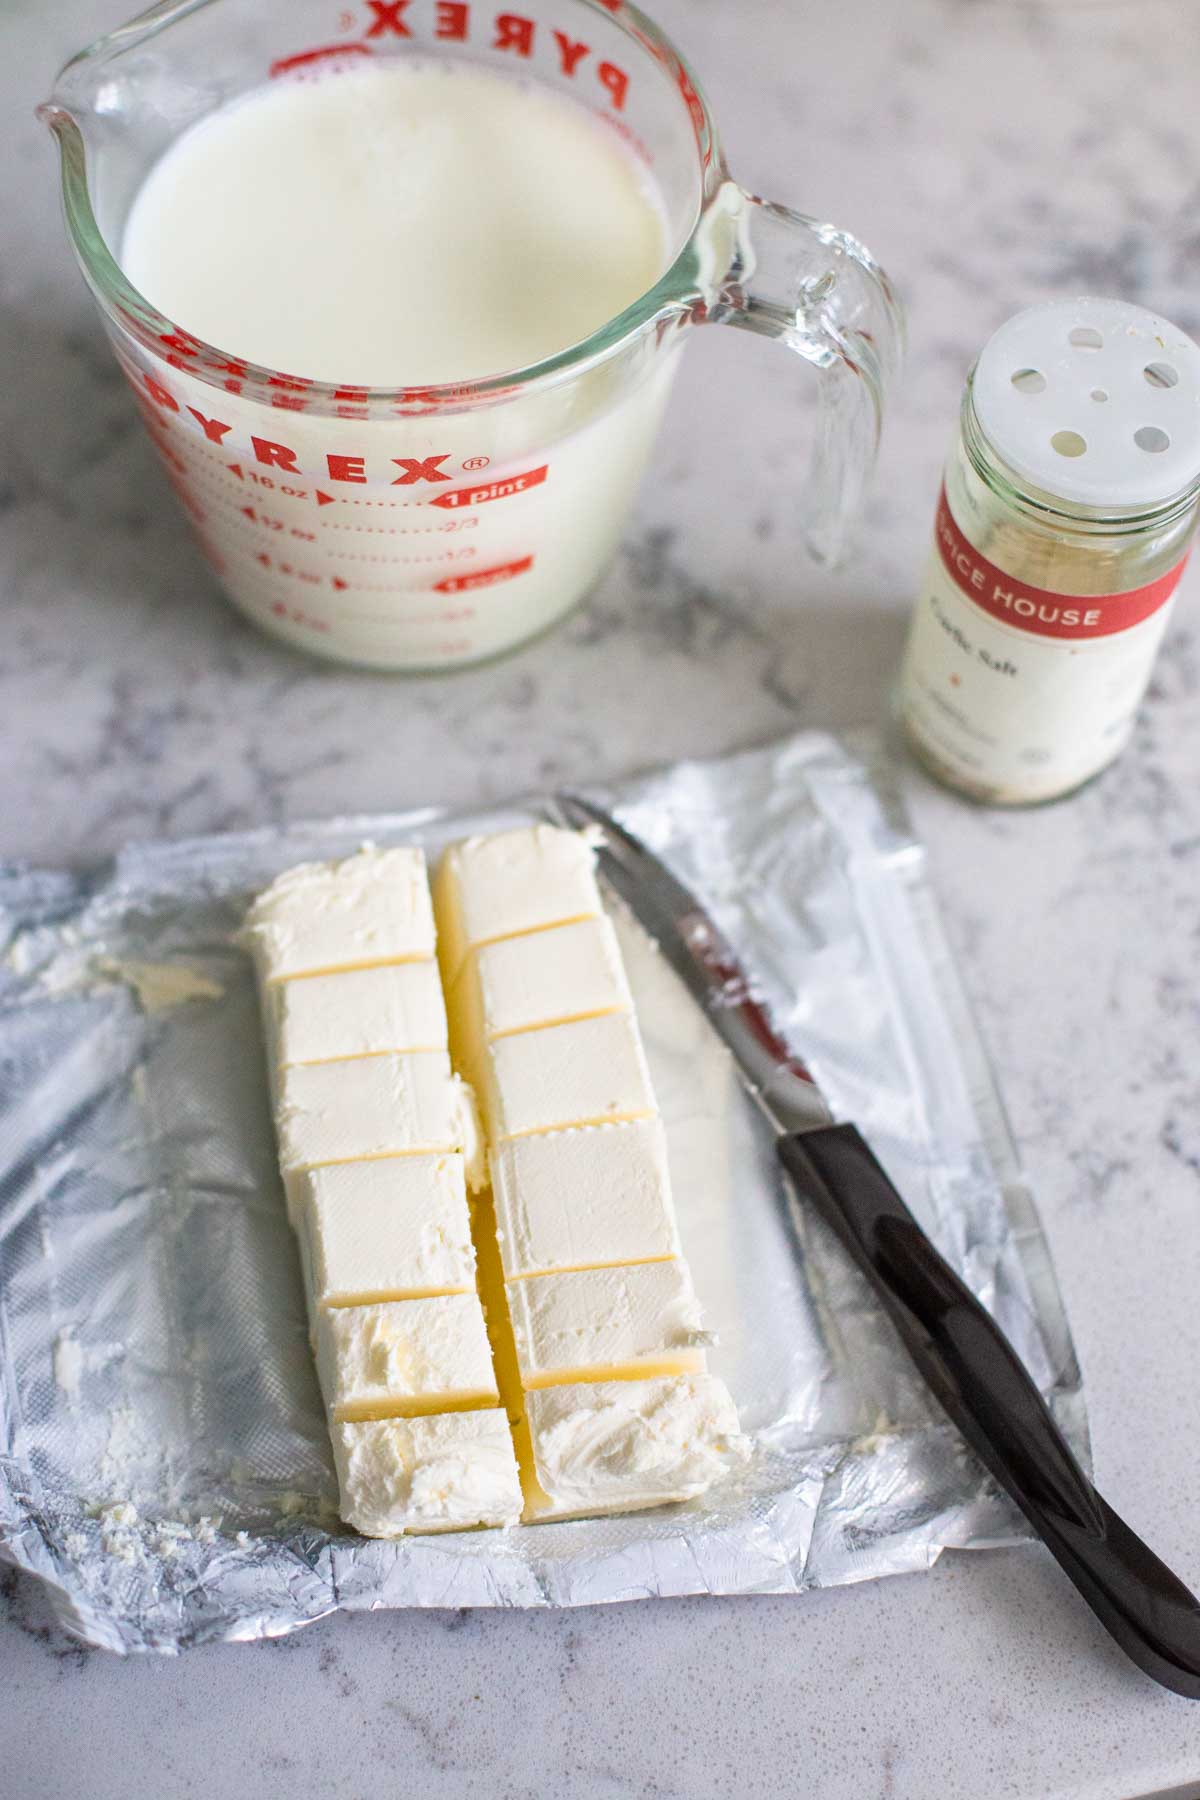 The brick of cream cheese has been cut into smaller cubes for easy melting in the sauce.